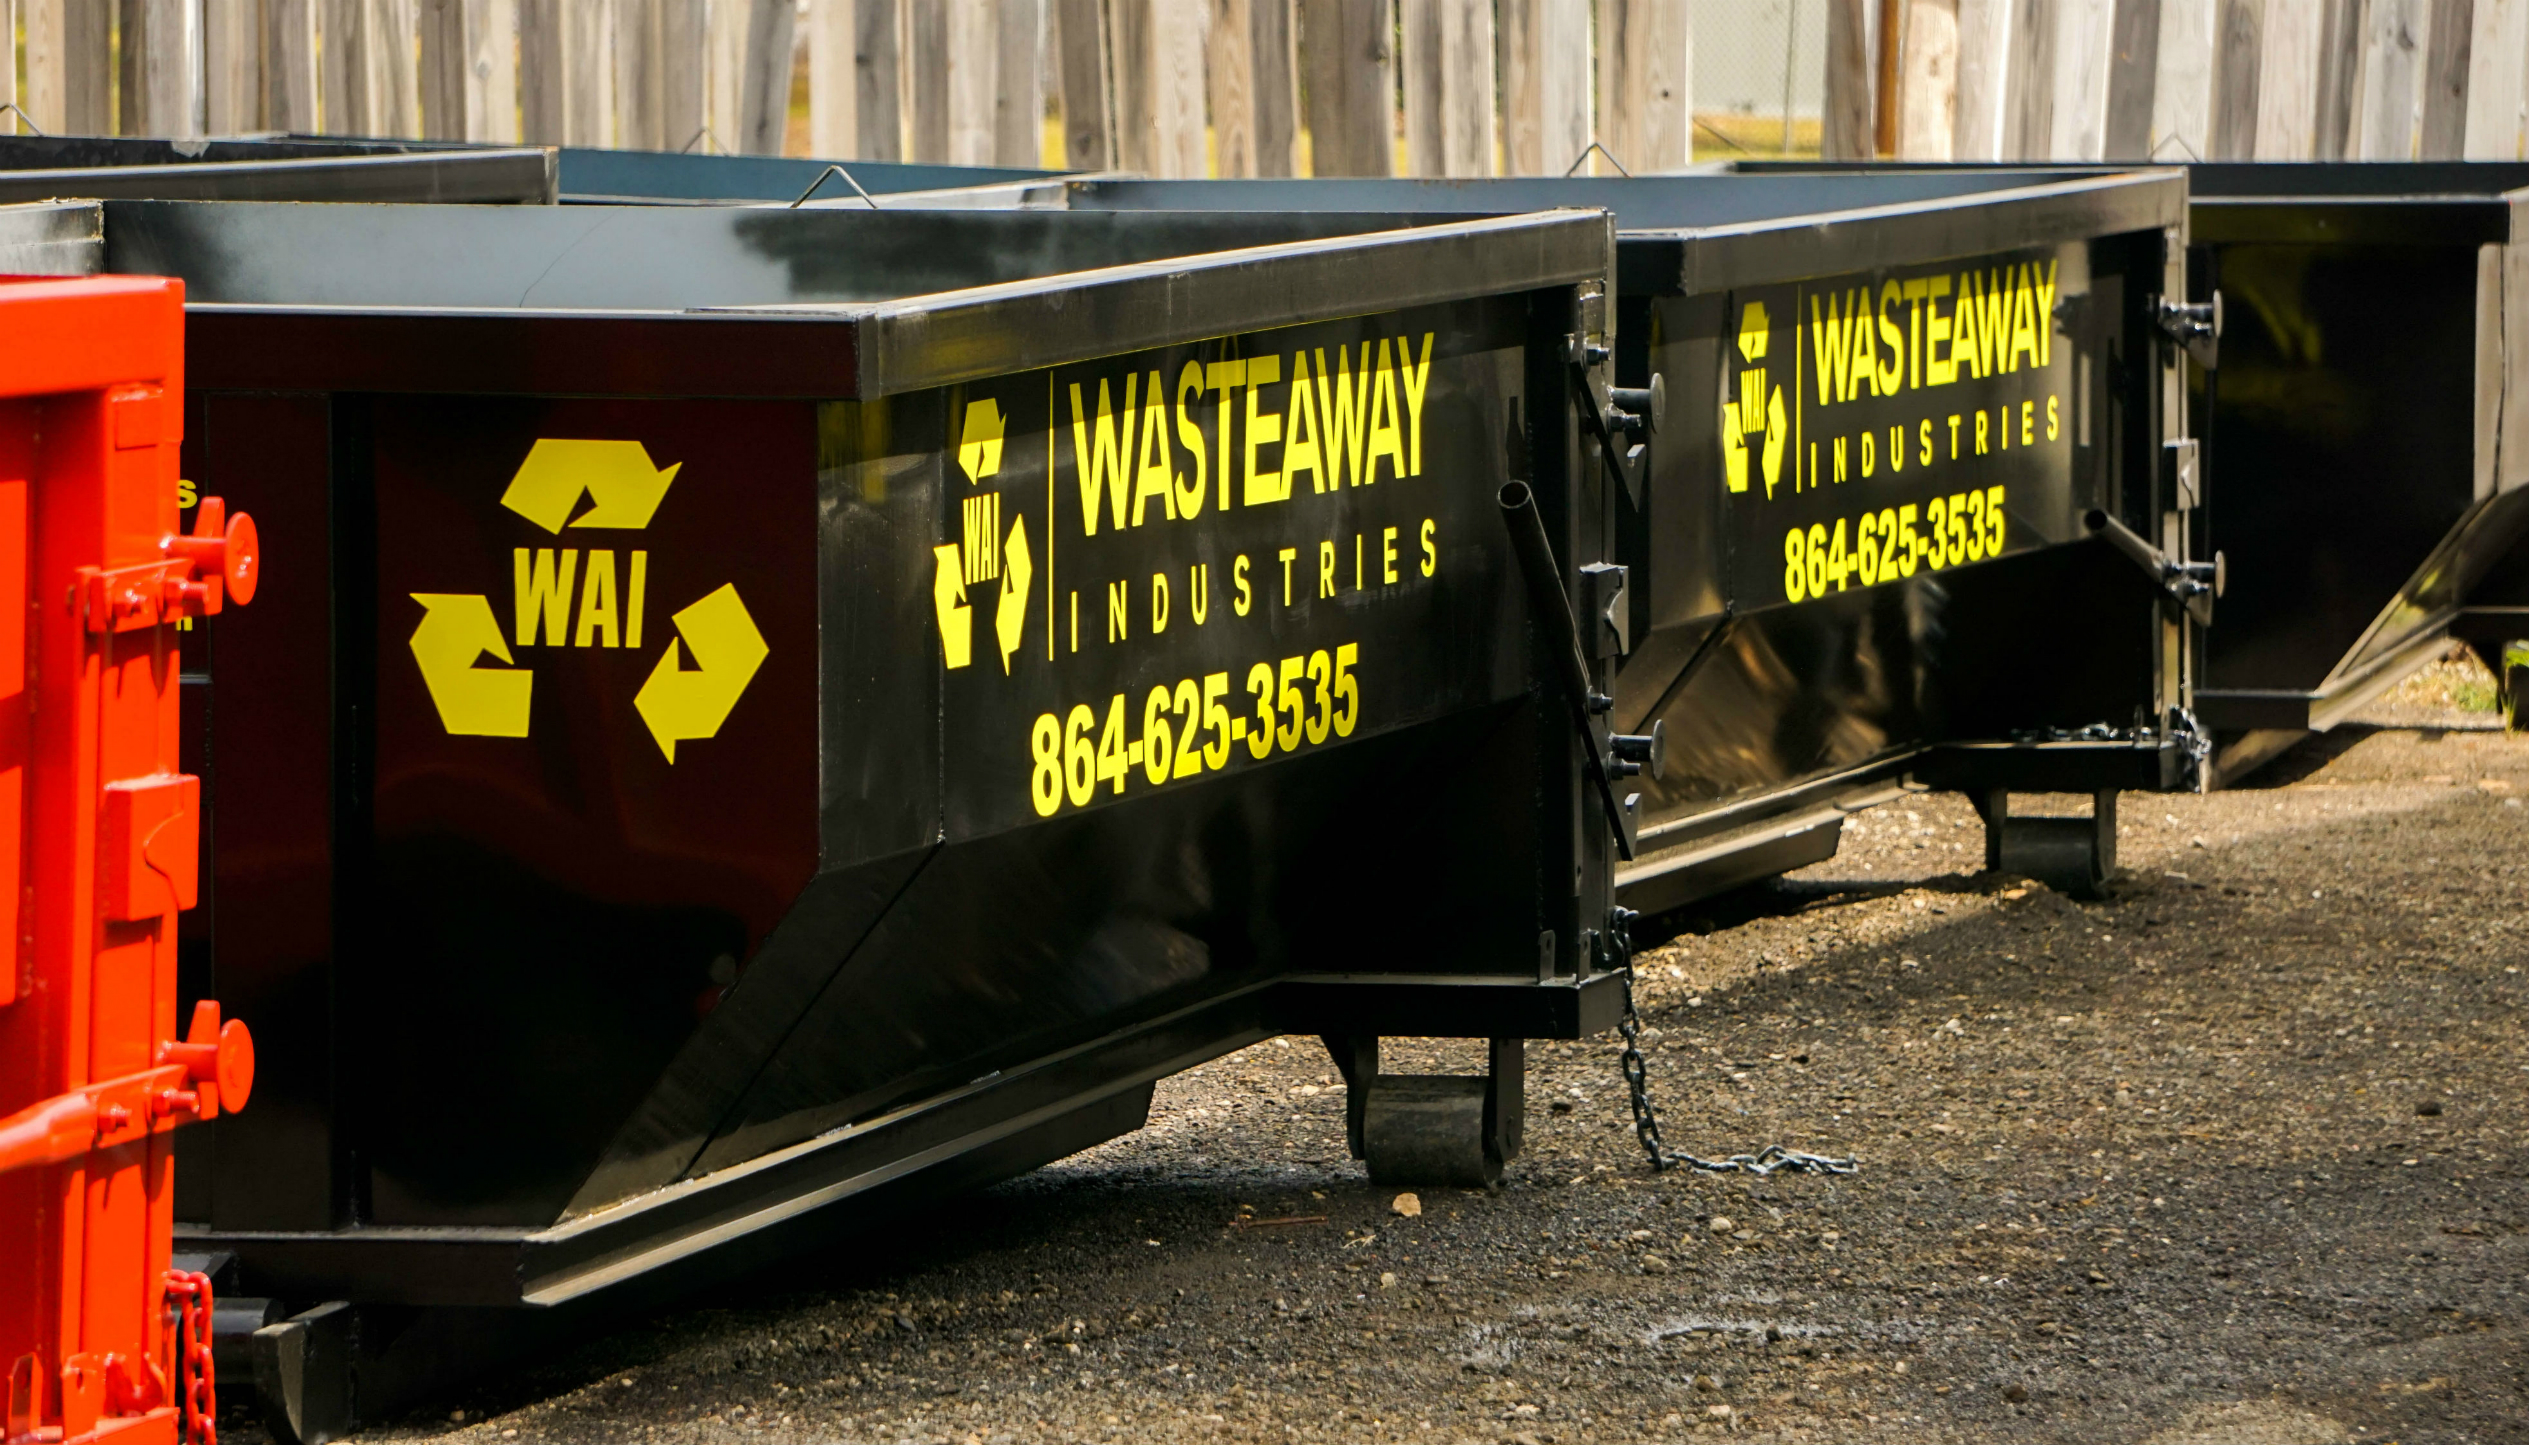 mobile dumpster containers in Greenville, SC | Rent a dumpster near me